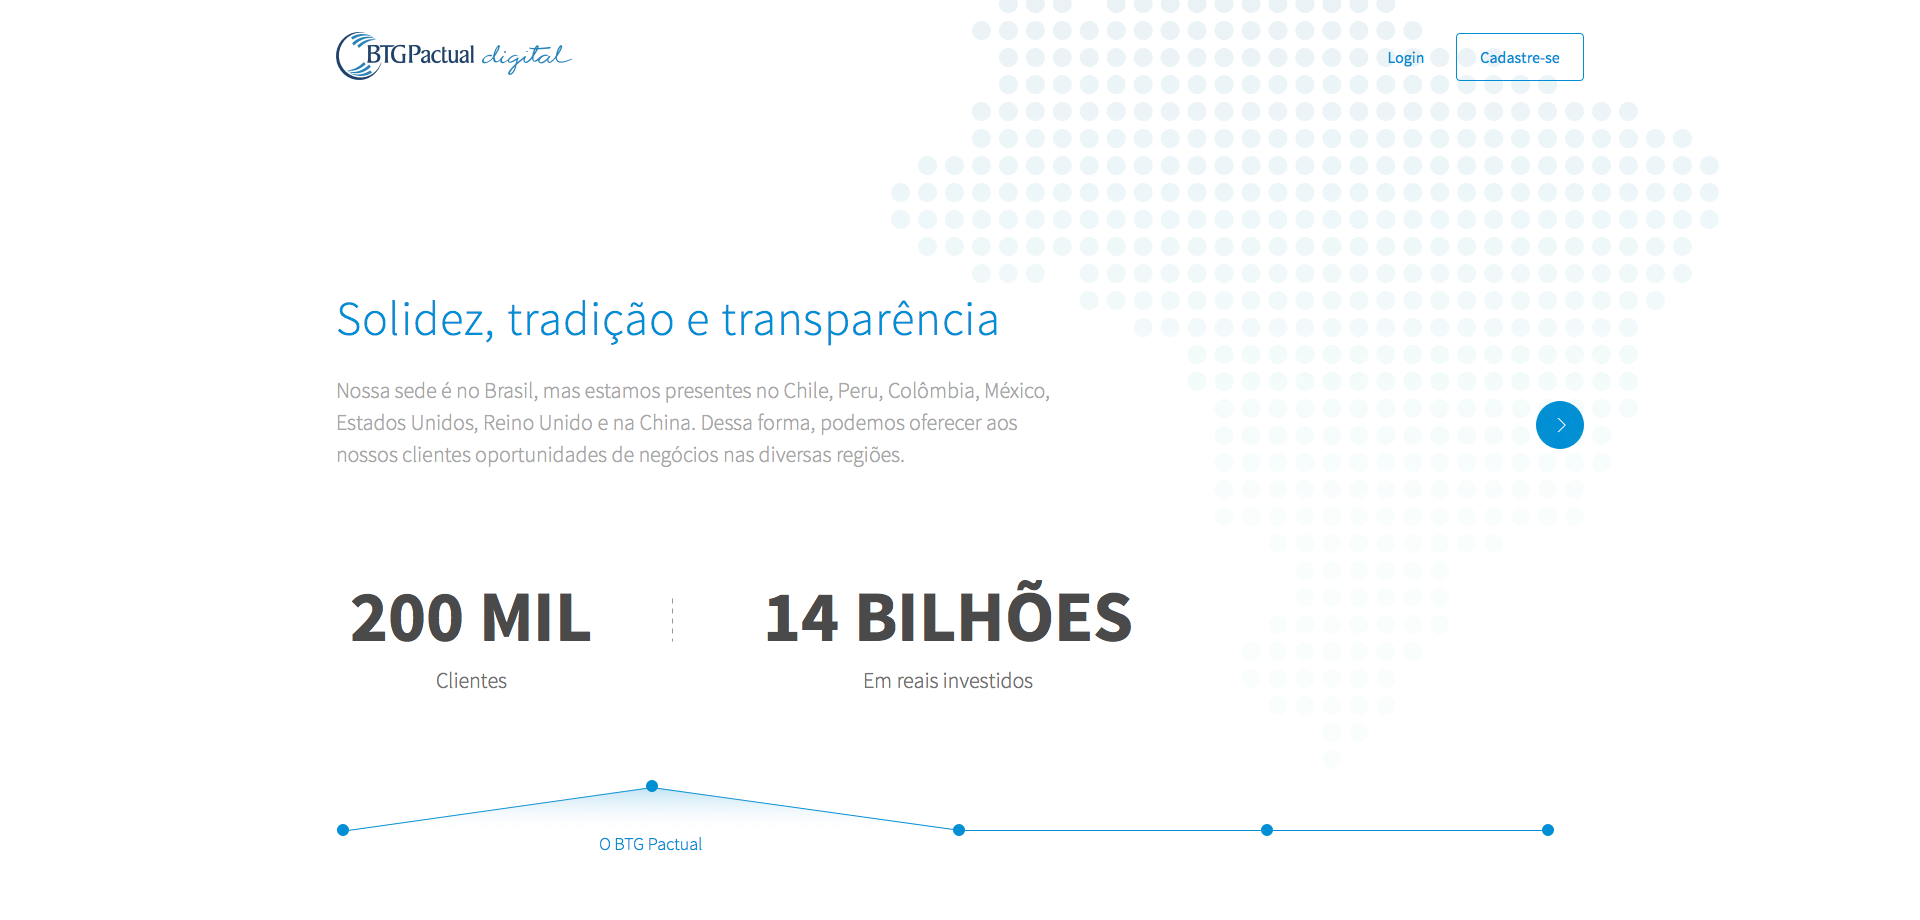 BTG-PACTUAL-Landing page-A1.png